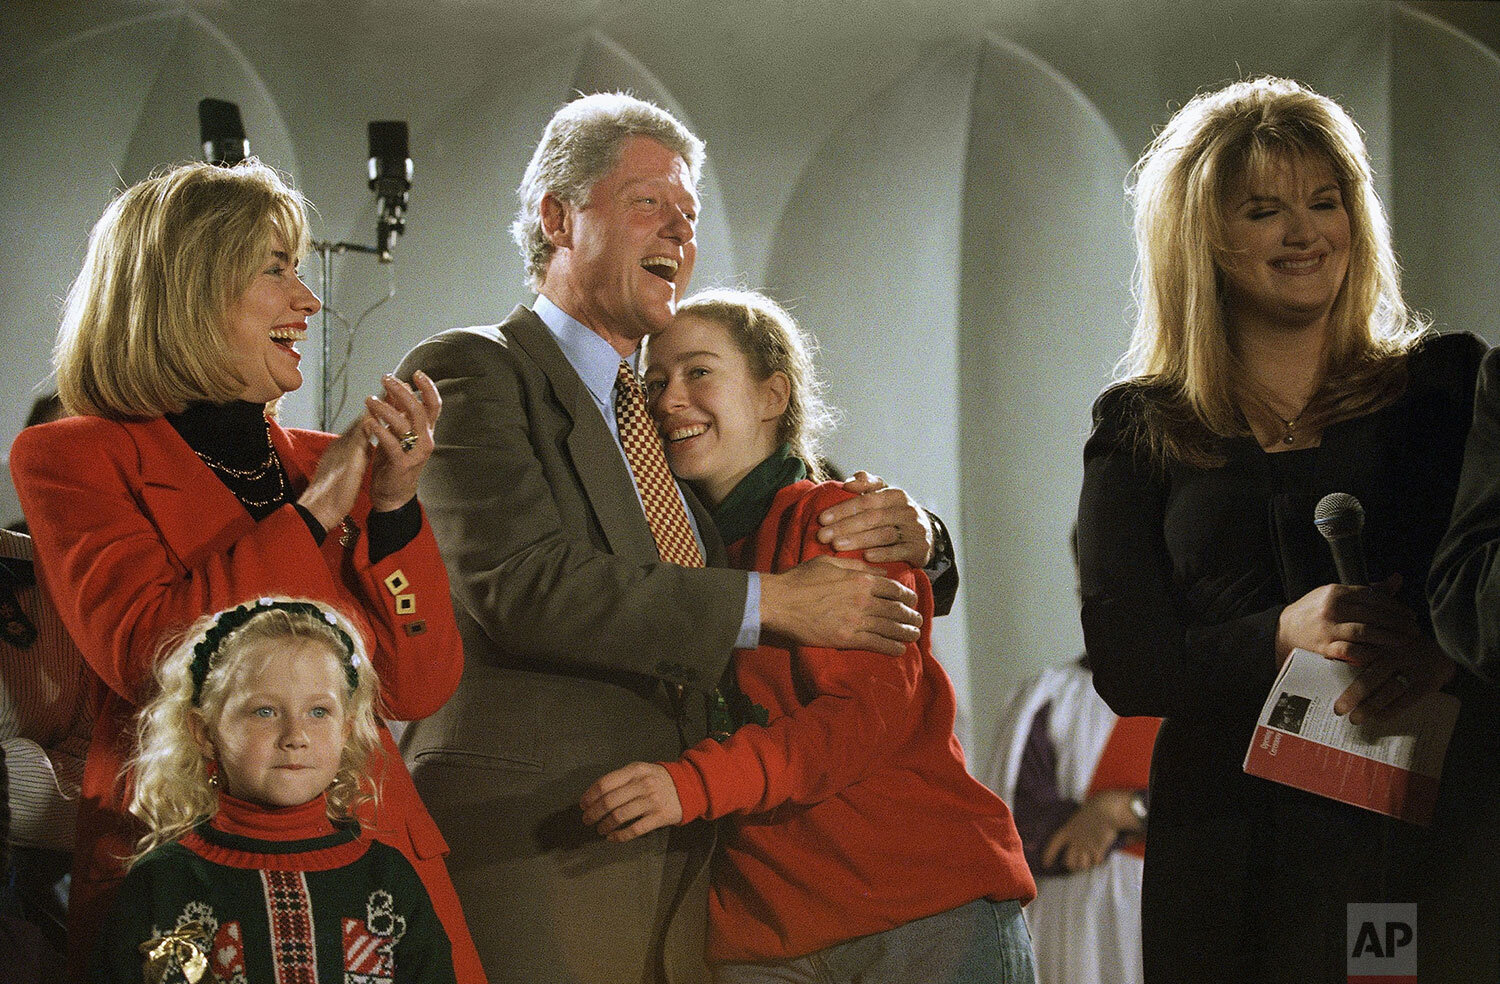  President Bill Clinton, first lady Hillary Rodham Clinton and daughter Chelsea, along with Dacie Marshall, five and one-half, sing during the Pageant of Peace on the Ellipse in Washington, Dec. 7, 1994. (AP Photo/Wilfredo Lee) 